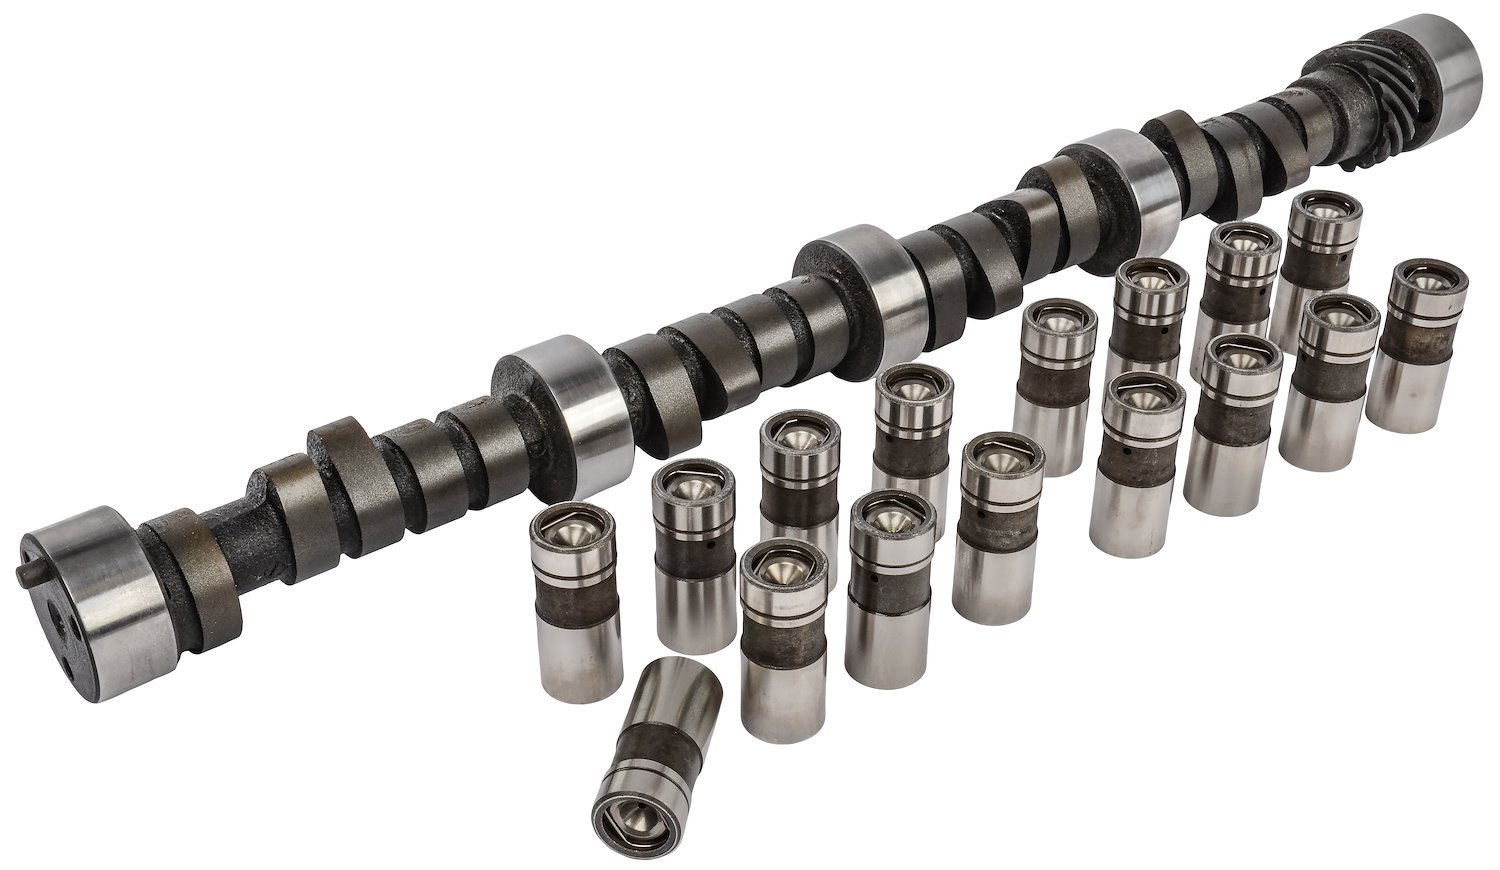 Hydraulic Flat Tappet Camshaft & Lifters for 1967-1990